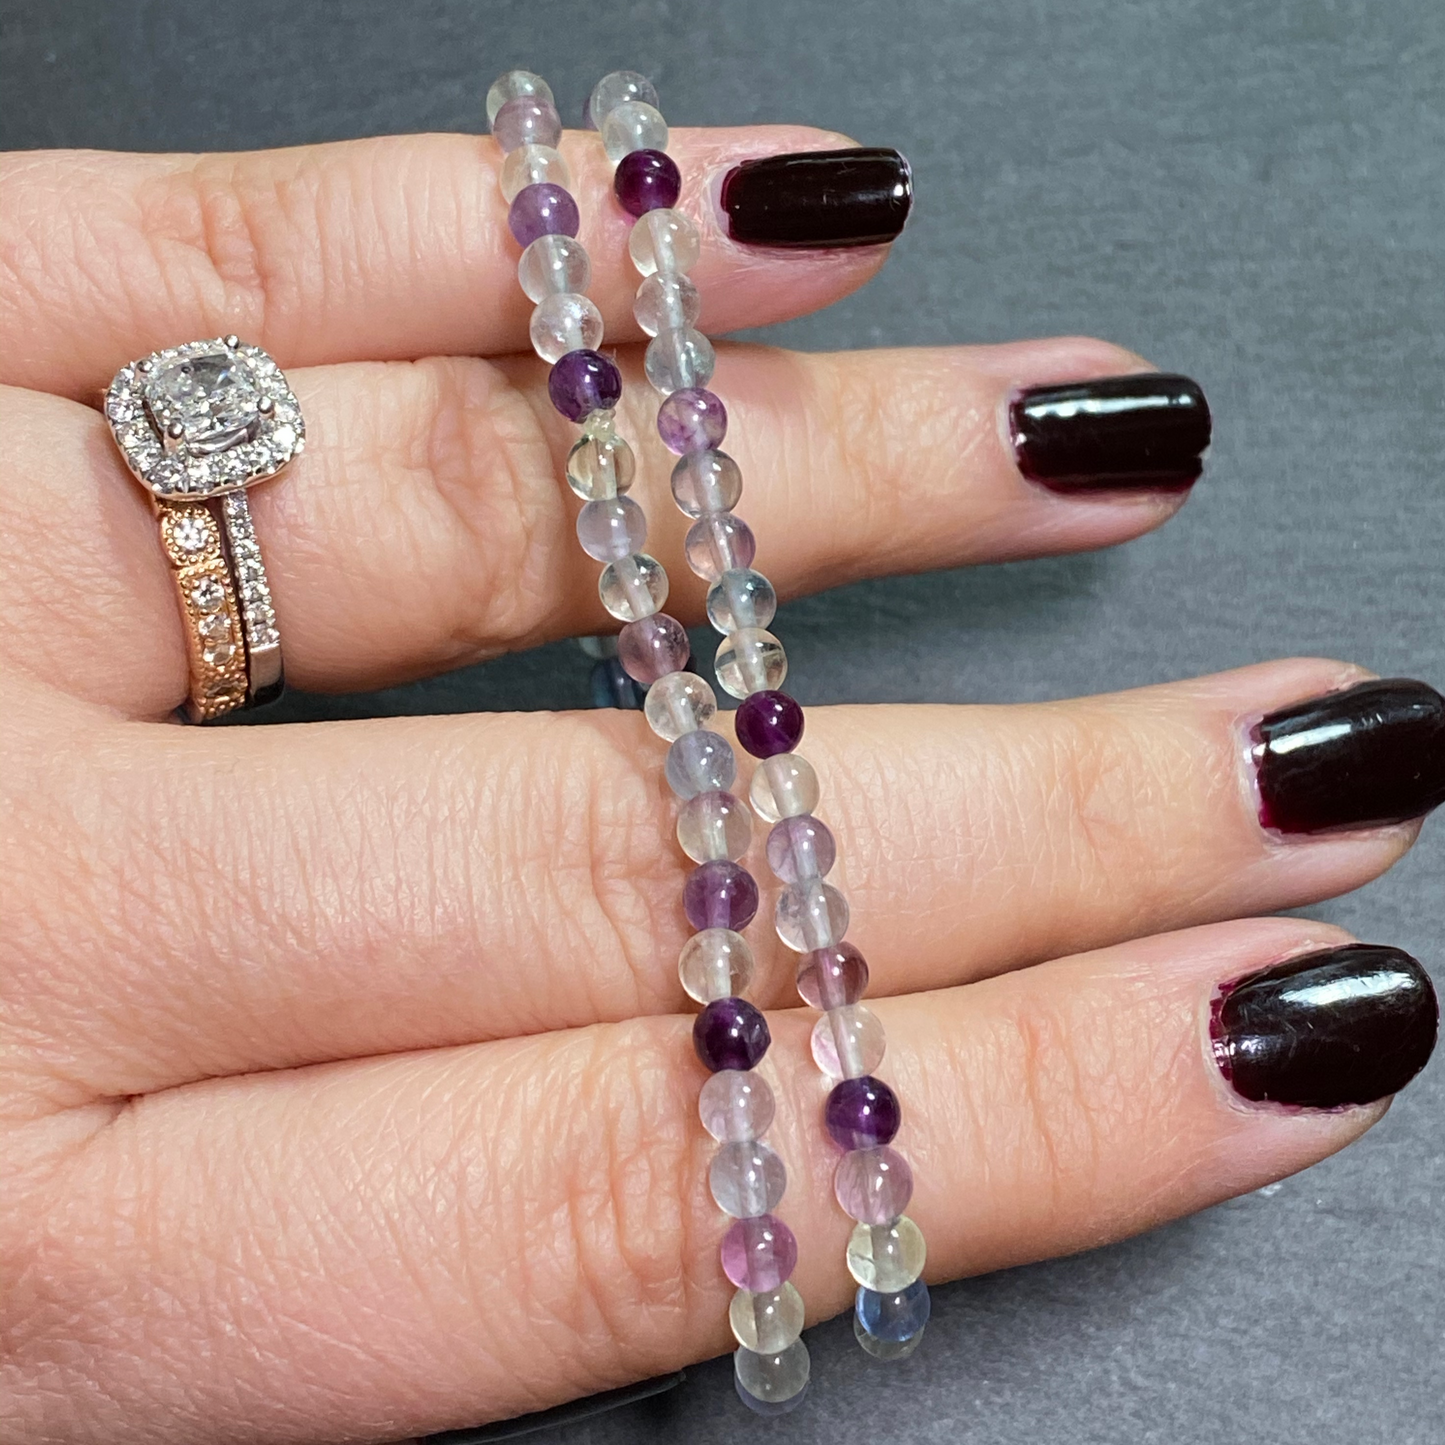 Two rainbow fluorite bracelets are displayed across a woman's fingers.